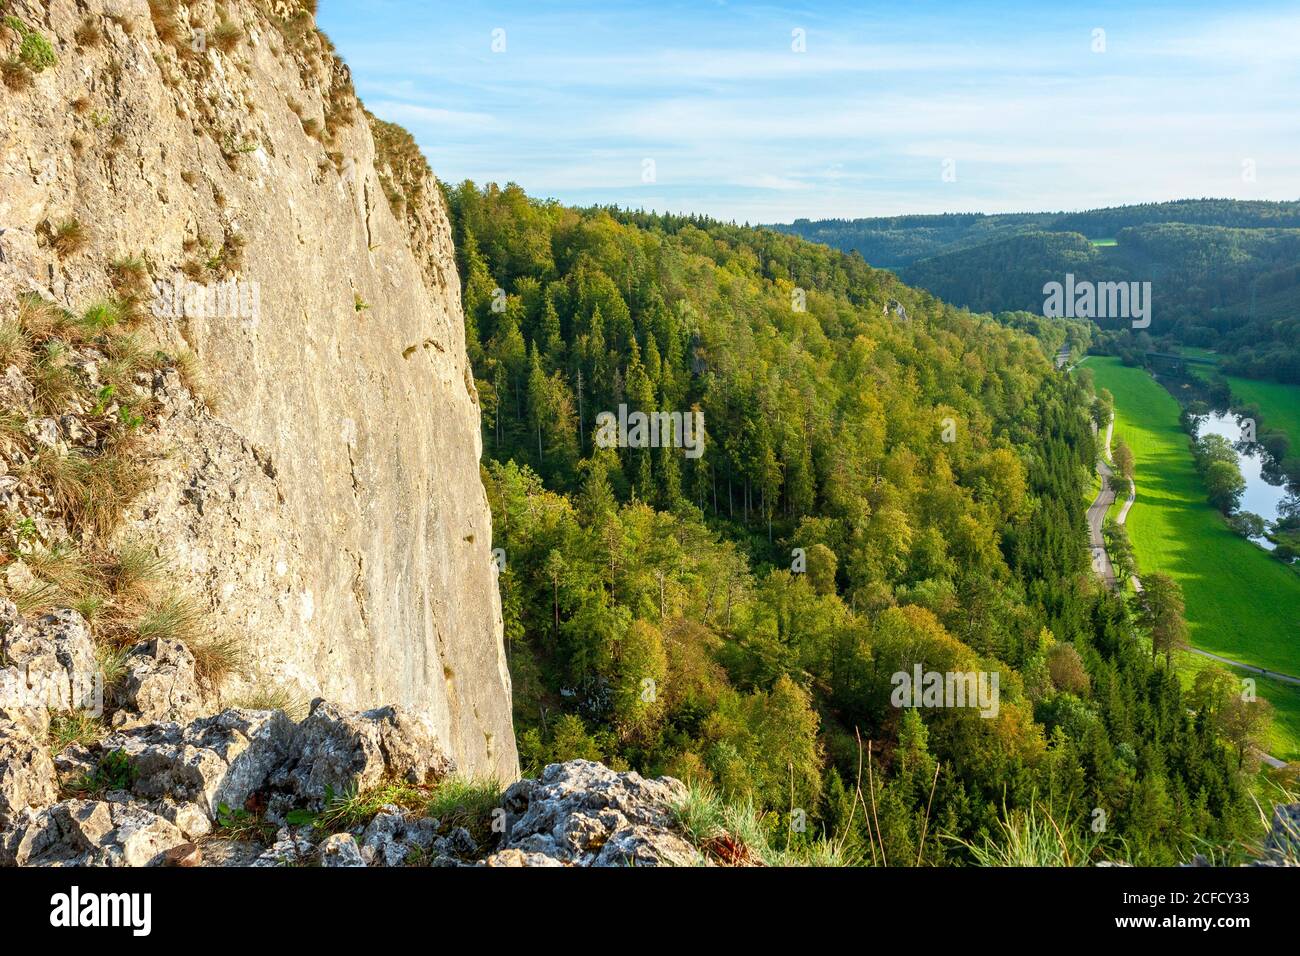 Germany, Baden-Württemberg, Beuron-Thiergarten, view from the Rabenfelsen into the Danube valley at Thiergarten. Stock Photo